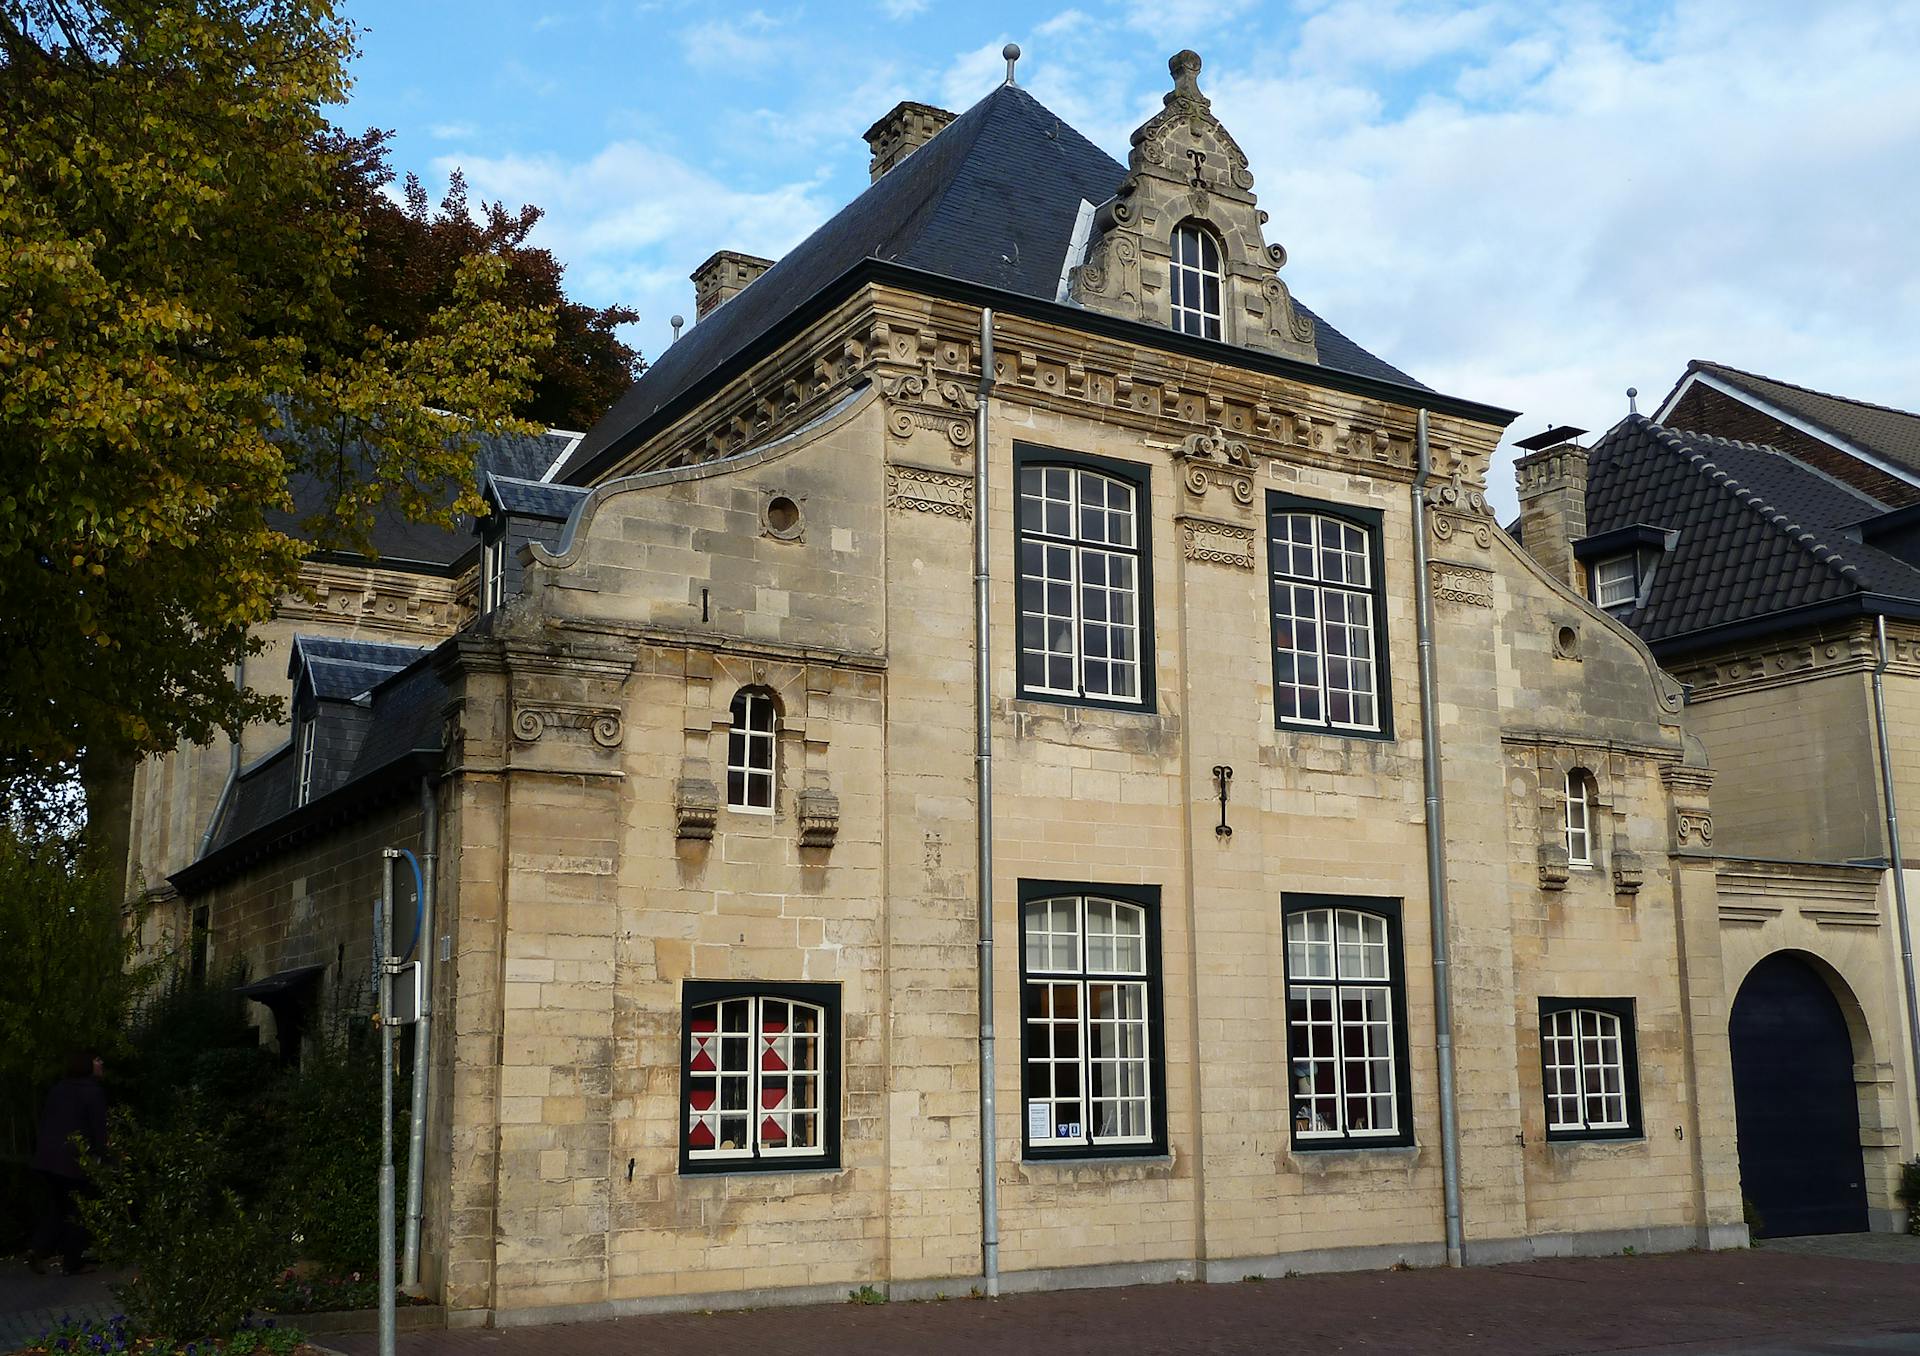 <p>Spaans Leenhof is a former feudal court in the town of Valkenburg, in the province of Limburg, in the Netherlands. It is located on the east side of the Theo Dorrenplein on the Geuleiland, near the river Geul. It is a hook-shaped building made of marlstone, with Ionic pilasters, console friezes, and a curved gable. It is a national monument.</p><p><br></p><p>The building was constructed in 1661 or 1667, probably as a refuge home for times of war and unrest. The name Spaans Leenhof (Spanish Feudal Court) was given in the 1940s as a reference to the Eighty Years’ War with Spain, which had already ended by then. </p><p><br></p><p>The building was used for land registration and lease agreements of farmers. It was also inhabited by distinguished families. Since 1964, it has been used by the VVV (Tourist Information Office), now the Visit Zuid-Limburg shop. A miniature of this building can be seen in Madurodam, a park with scale models of famous Dutch landmarks.</p><p><br></p>